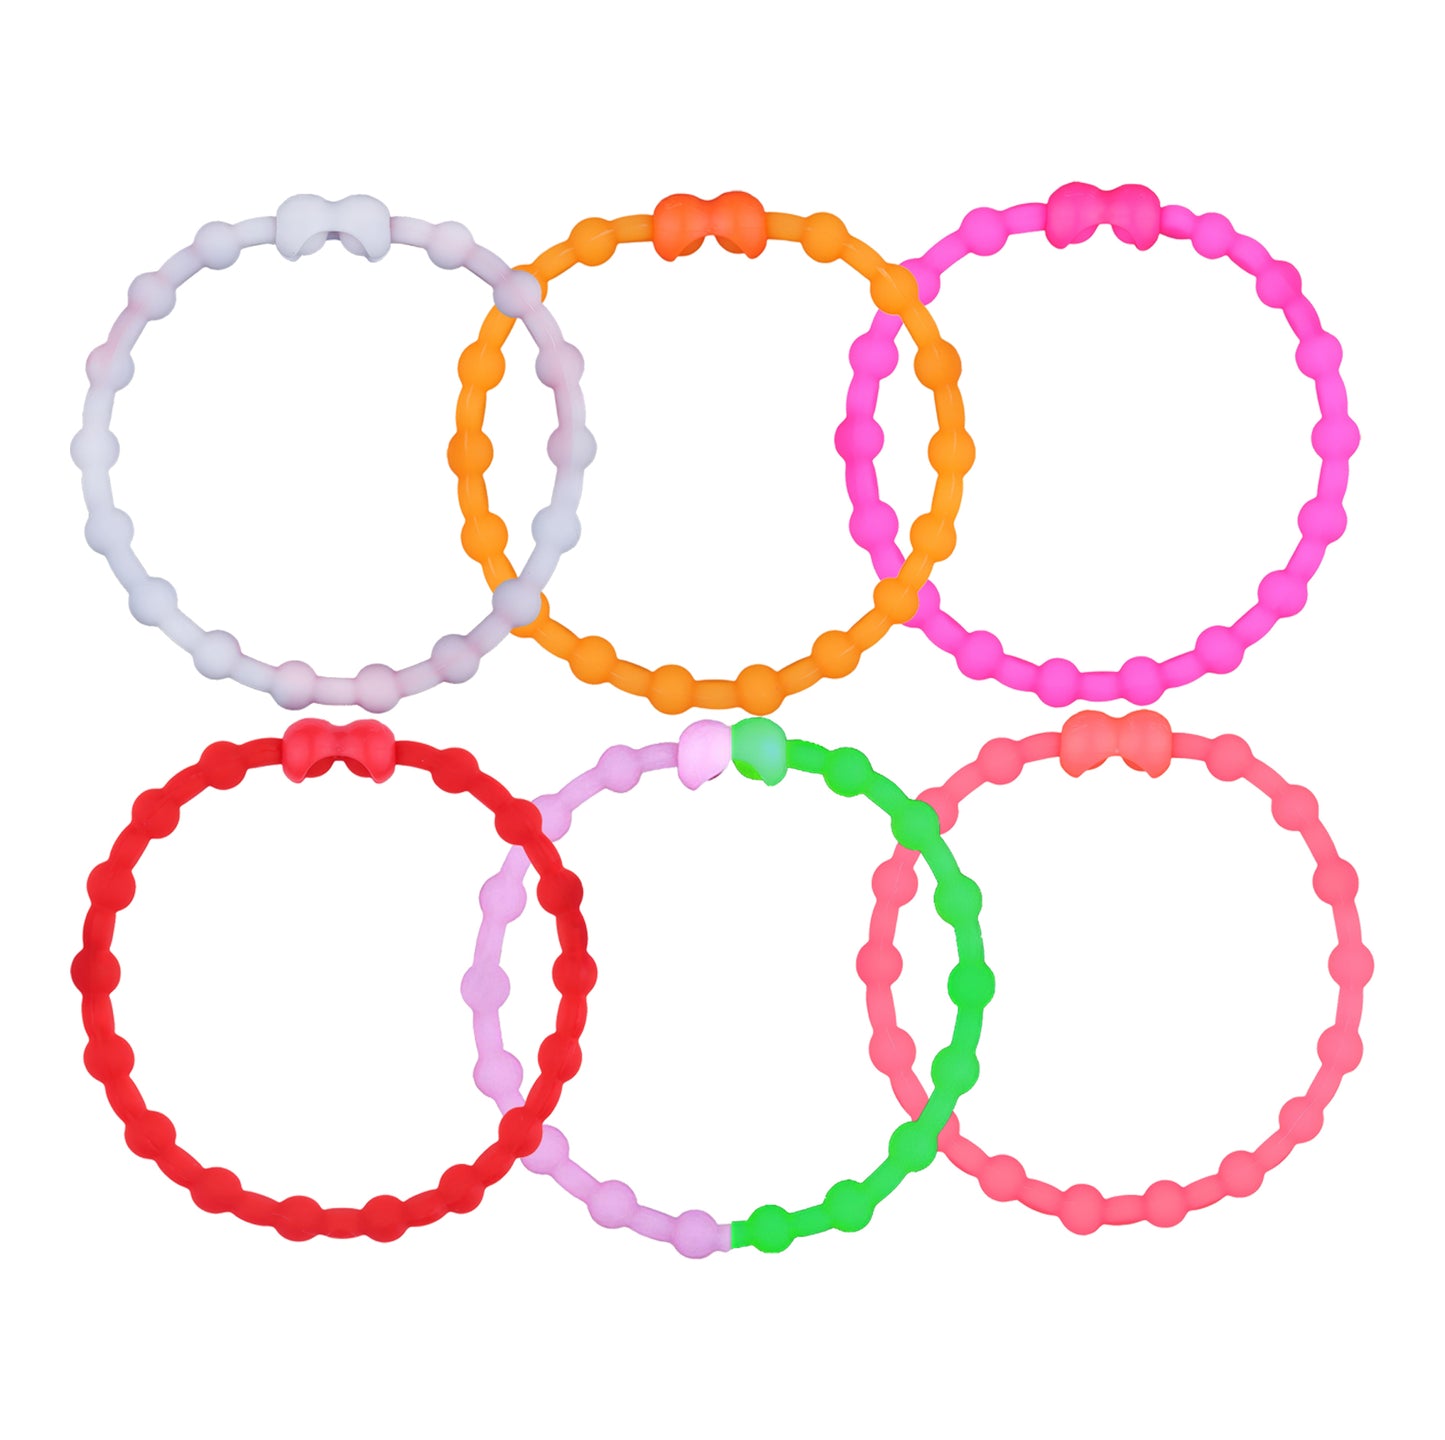 Sunset Glow Pack Hair Ties (6-Pack) - Paint Your Hair with the Colors of Dusk